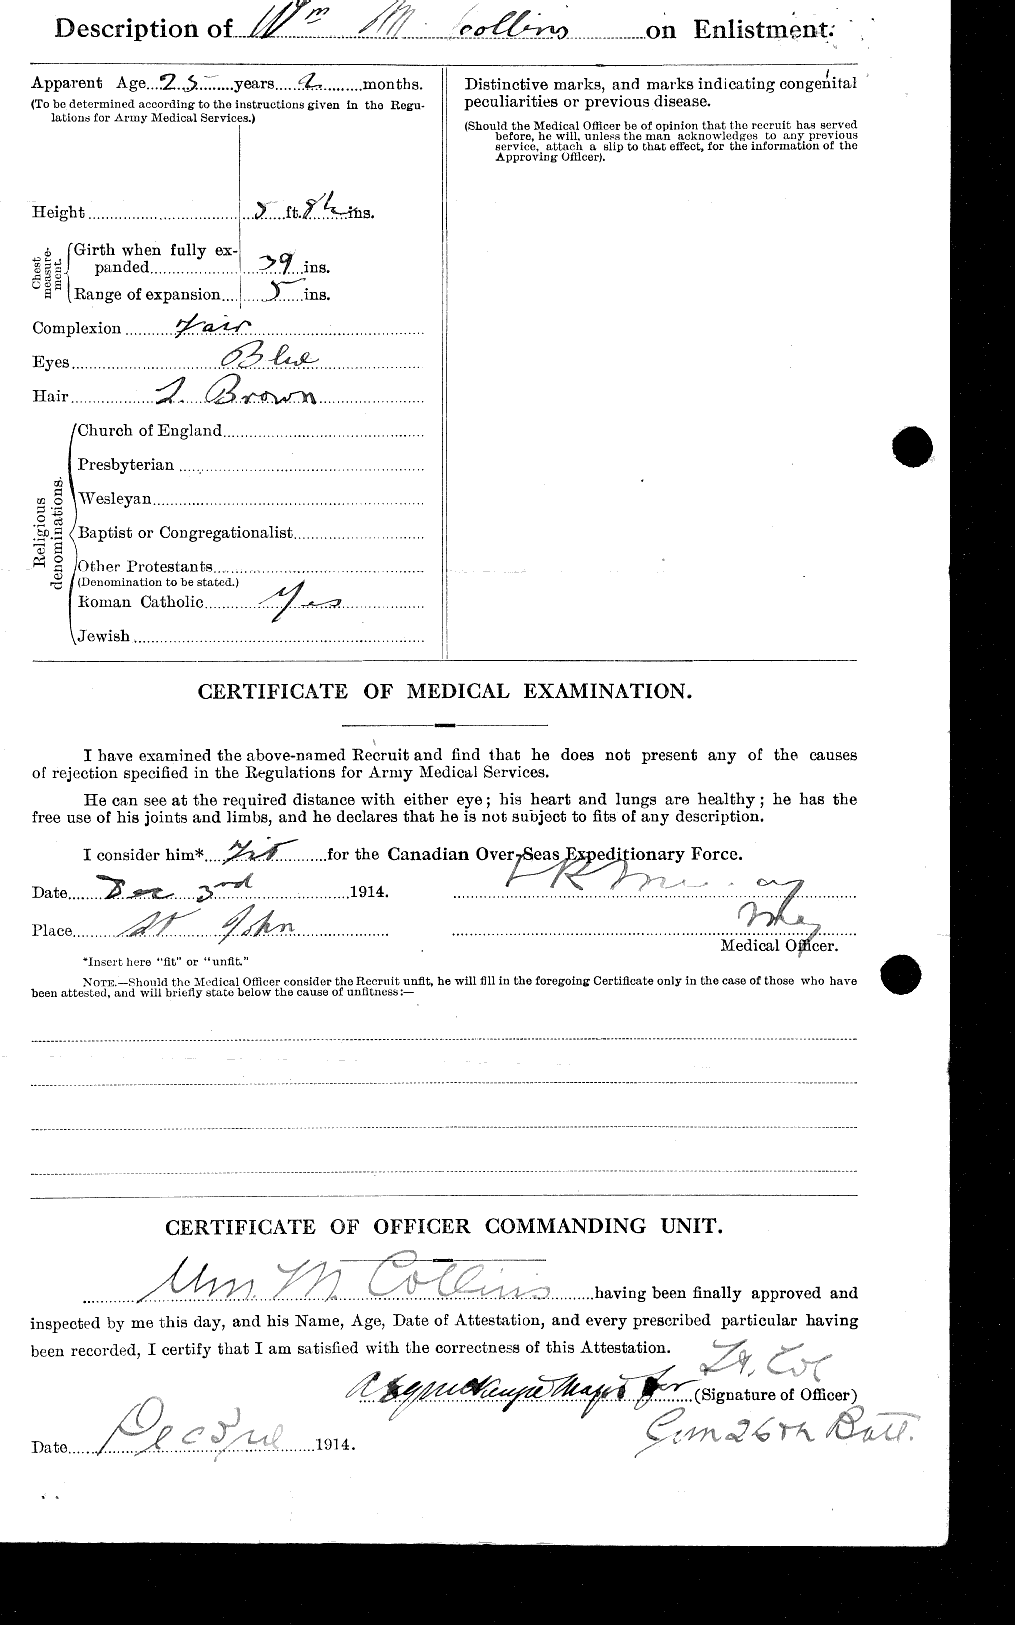 Personnel Records of the First World War - CEF 034624b